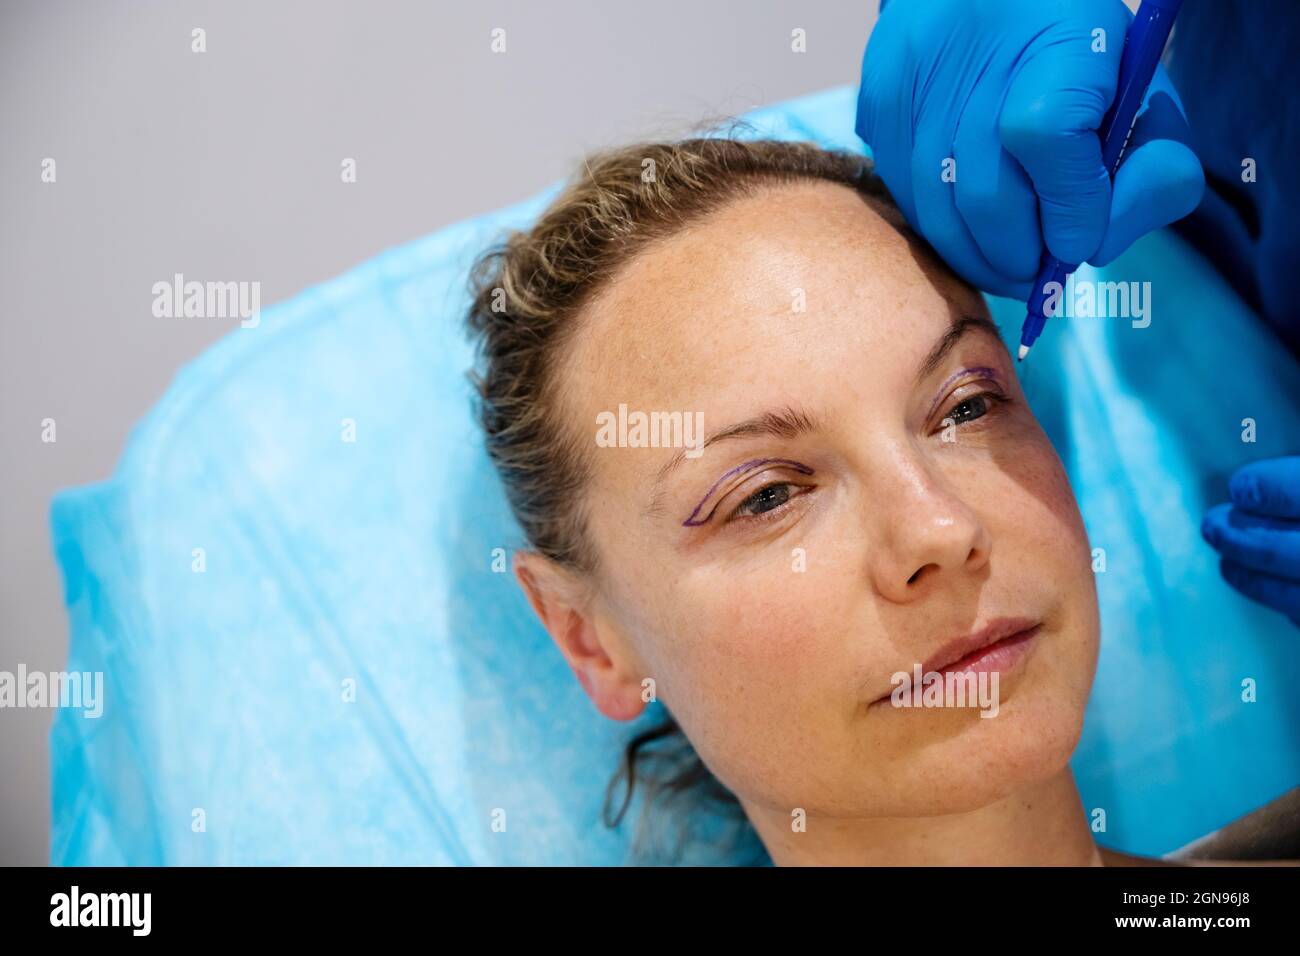 Surgeon drawing line on girl eye with marker preparing for procedure. Stock Photo